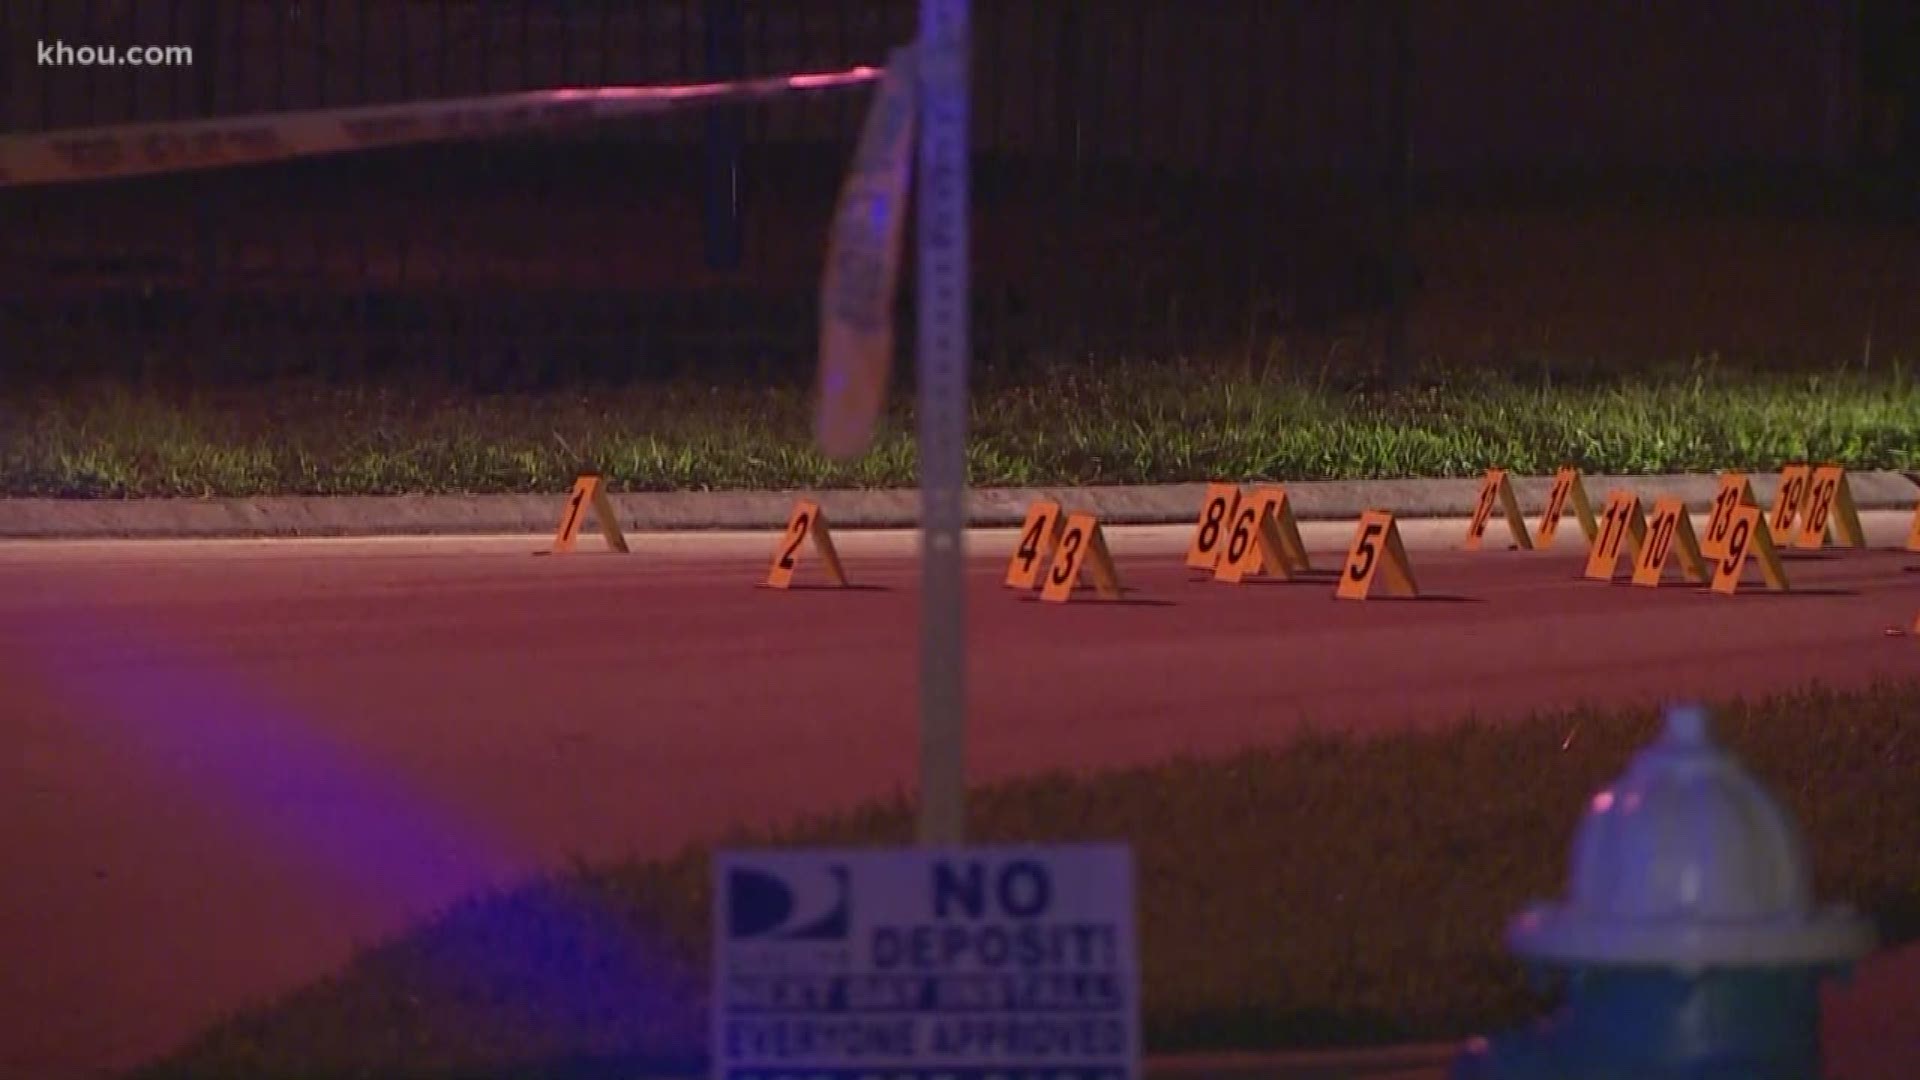 A 14-year-old was shot in the hand after a transaction over a cell phone went sour in west Harris County overnight.